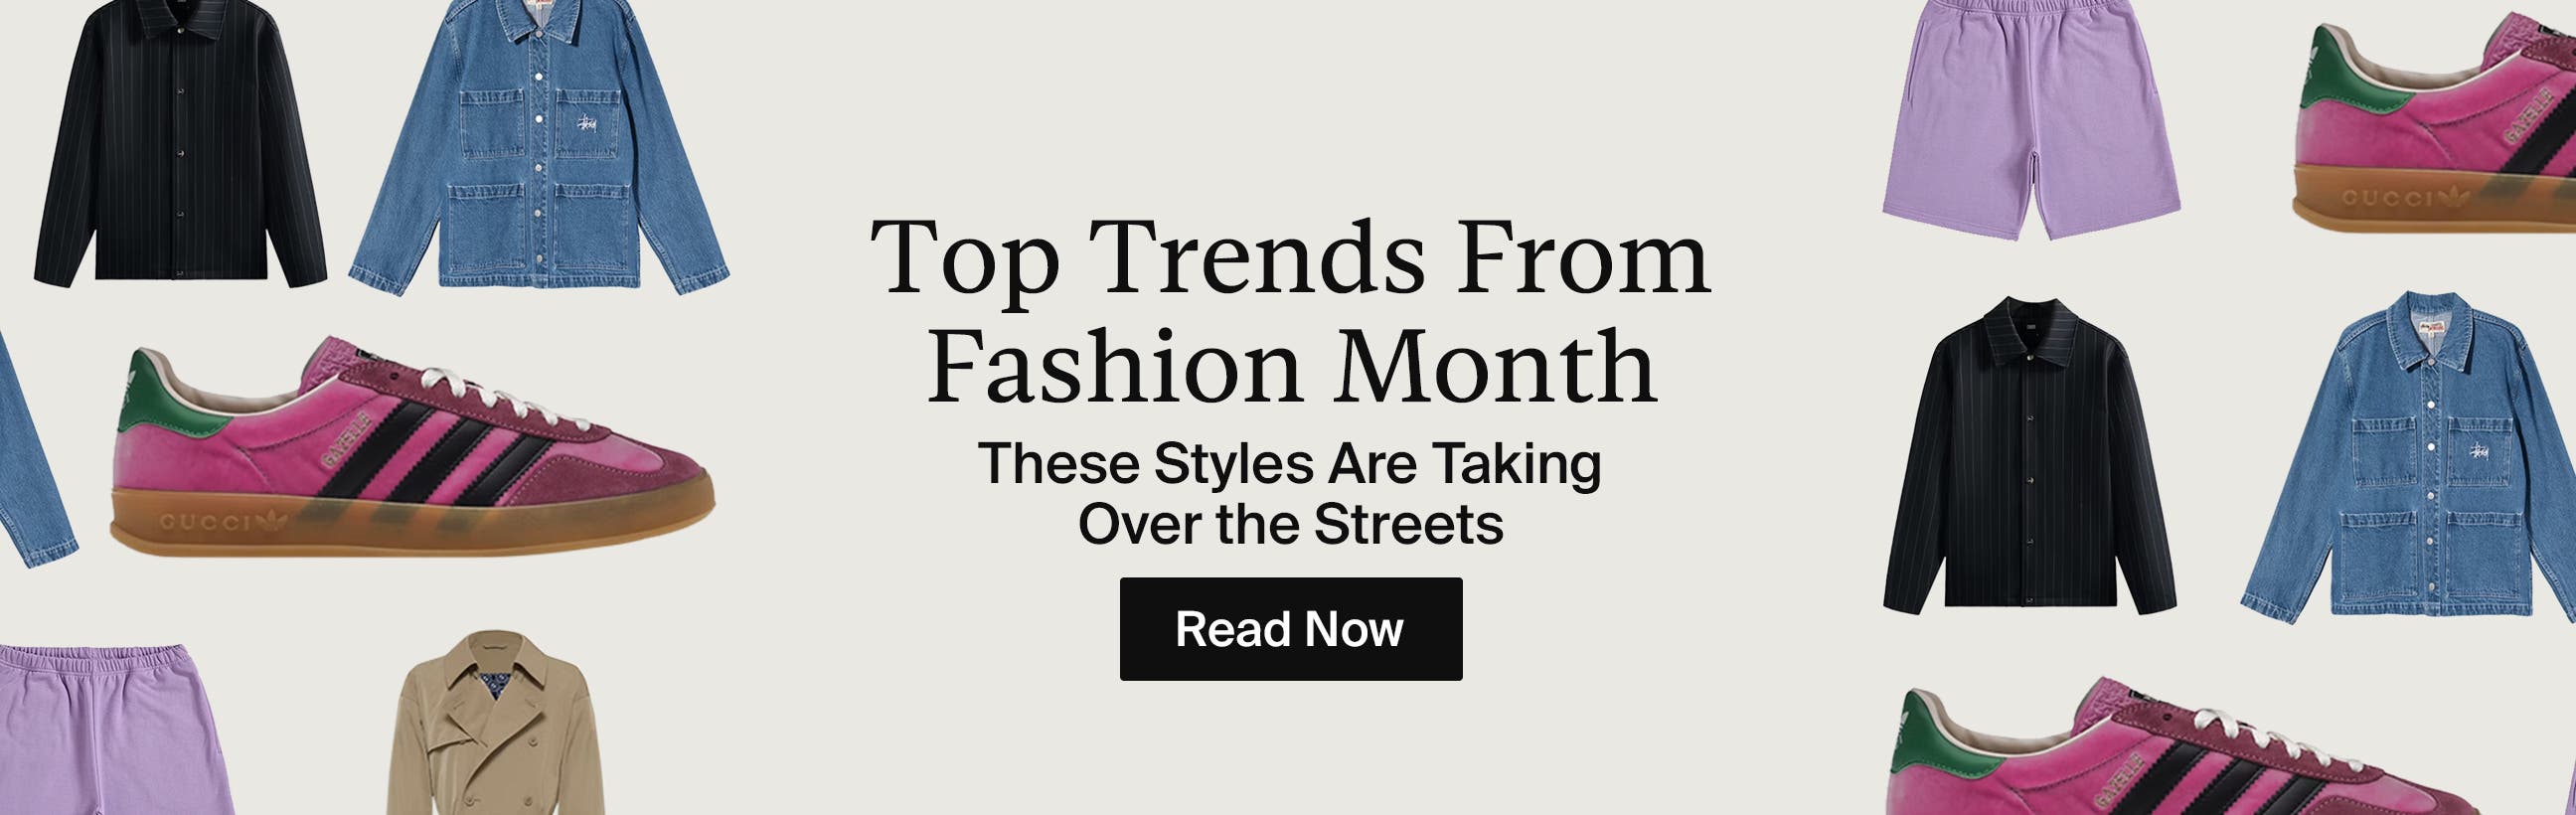 Top-Trends-From-Fashion-Month_Primary_Desktop.png